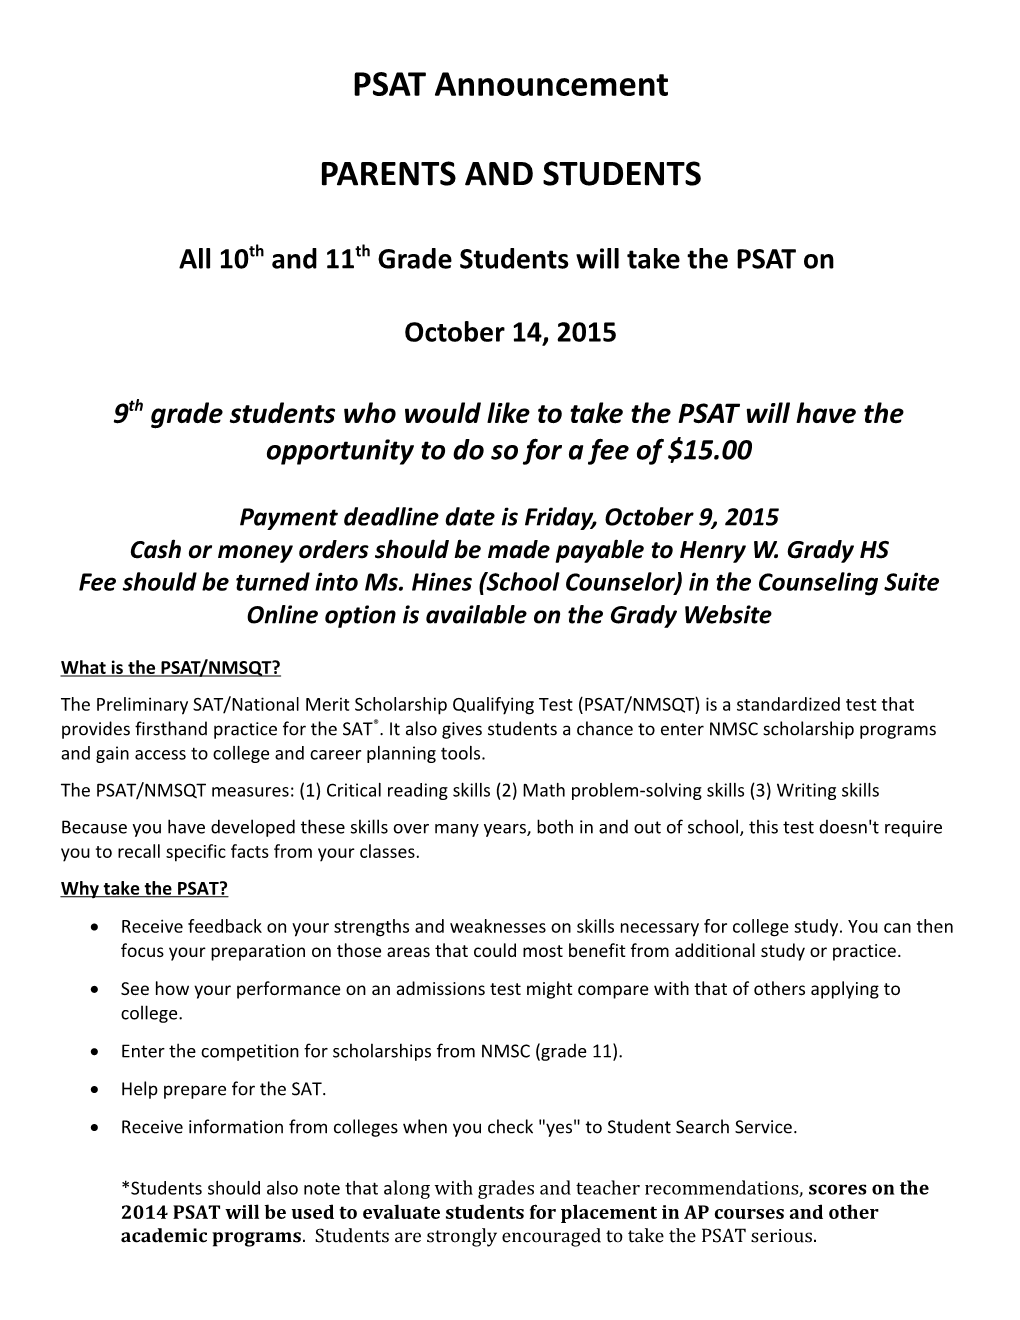 All 10Th and 11Th Grade Students Will Take the PSAT On